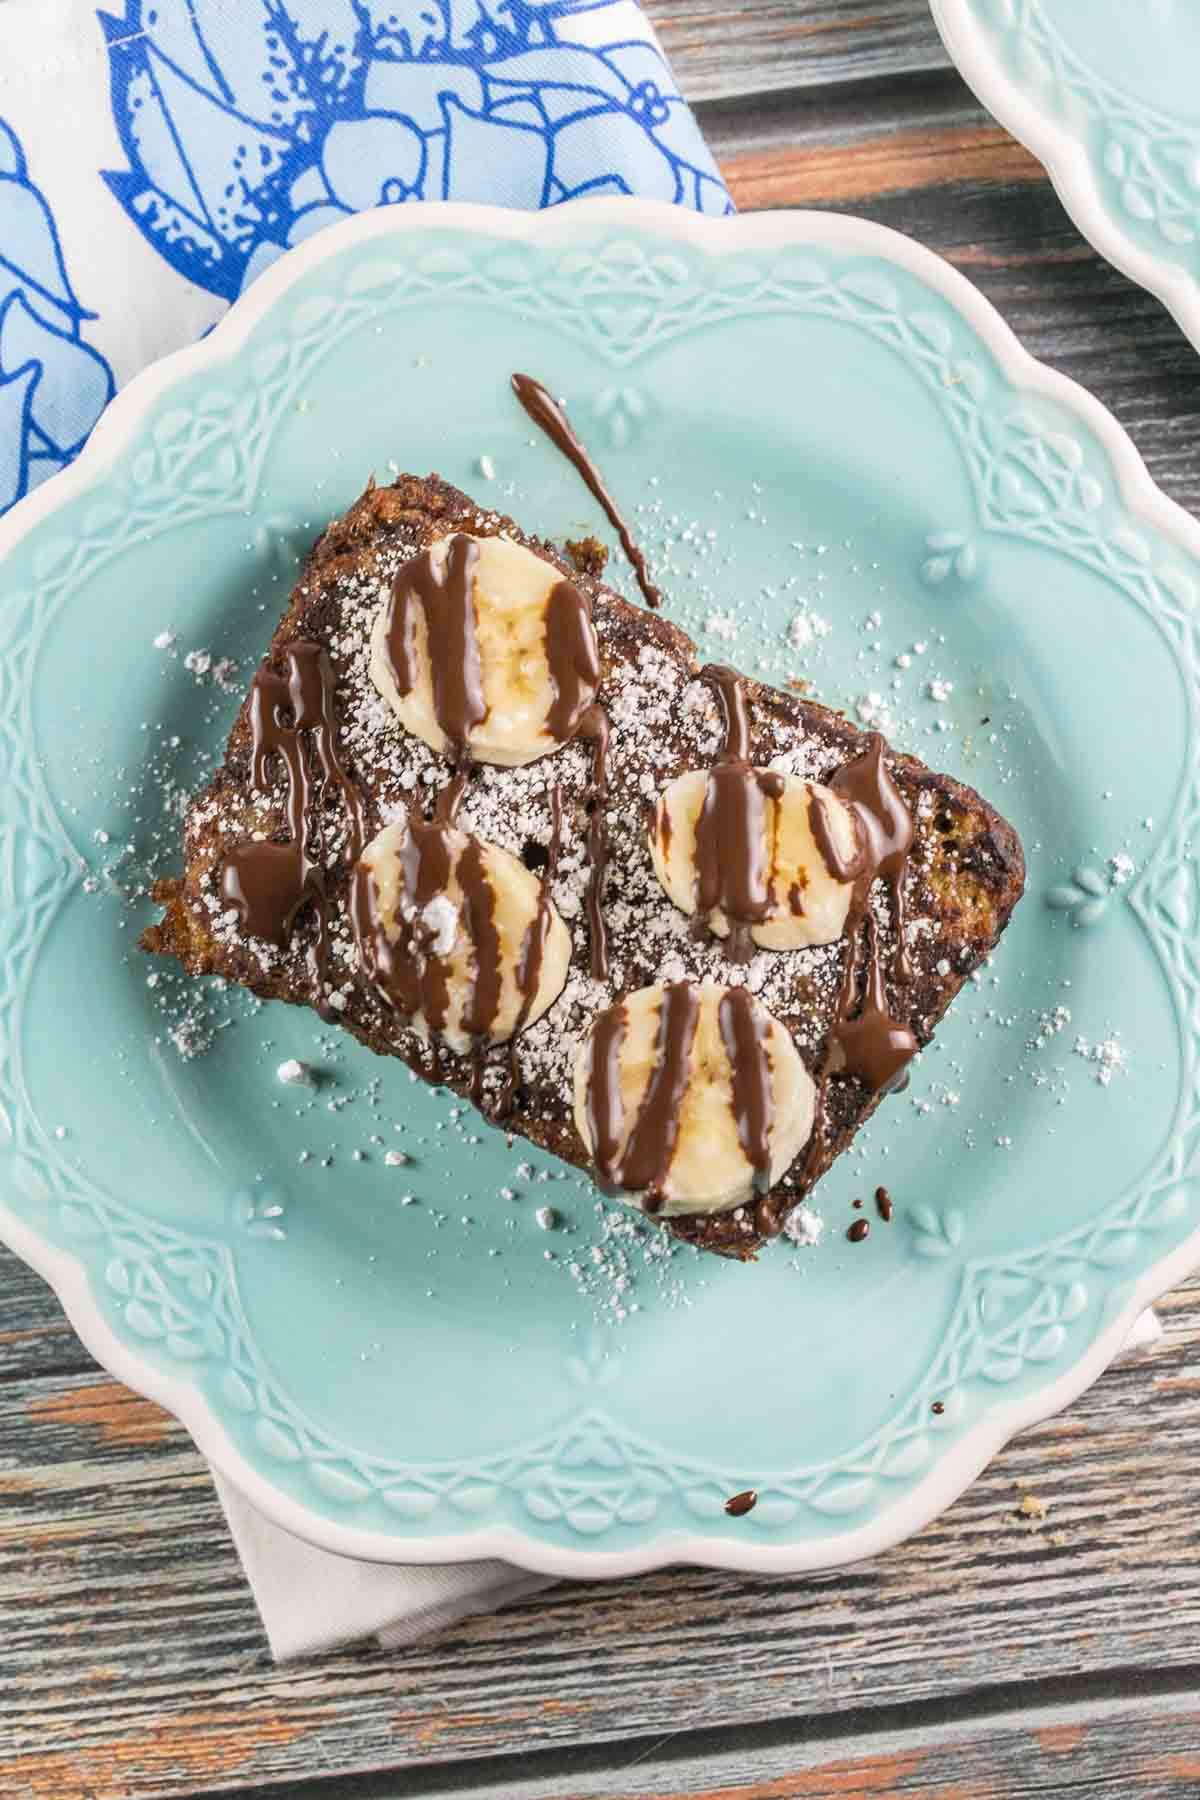 Banana Bread French Toast: an indulgent and decadent breakfast or brunch, worthy of a special occasion... or any day. #bunsenburnerbakery #brunch #breakfast #frenchtoast #bananabread